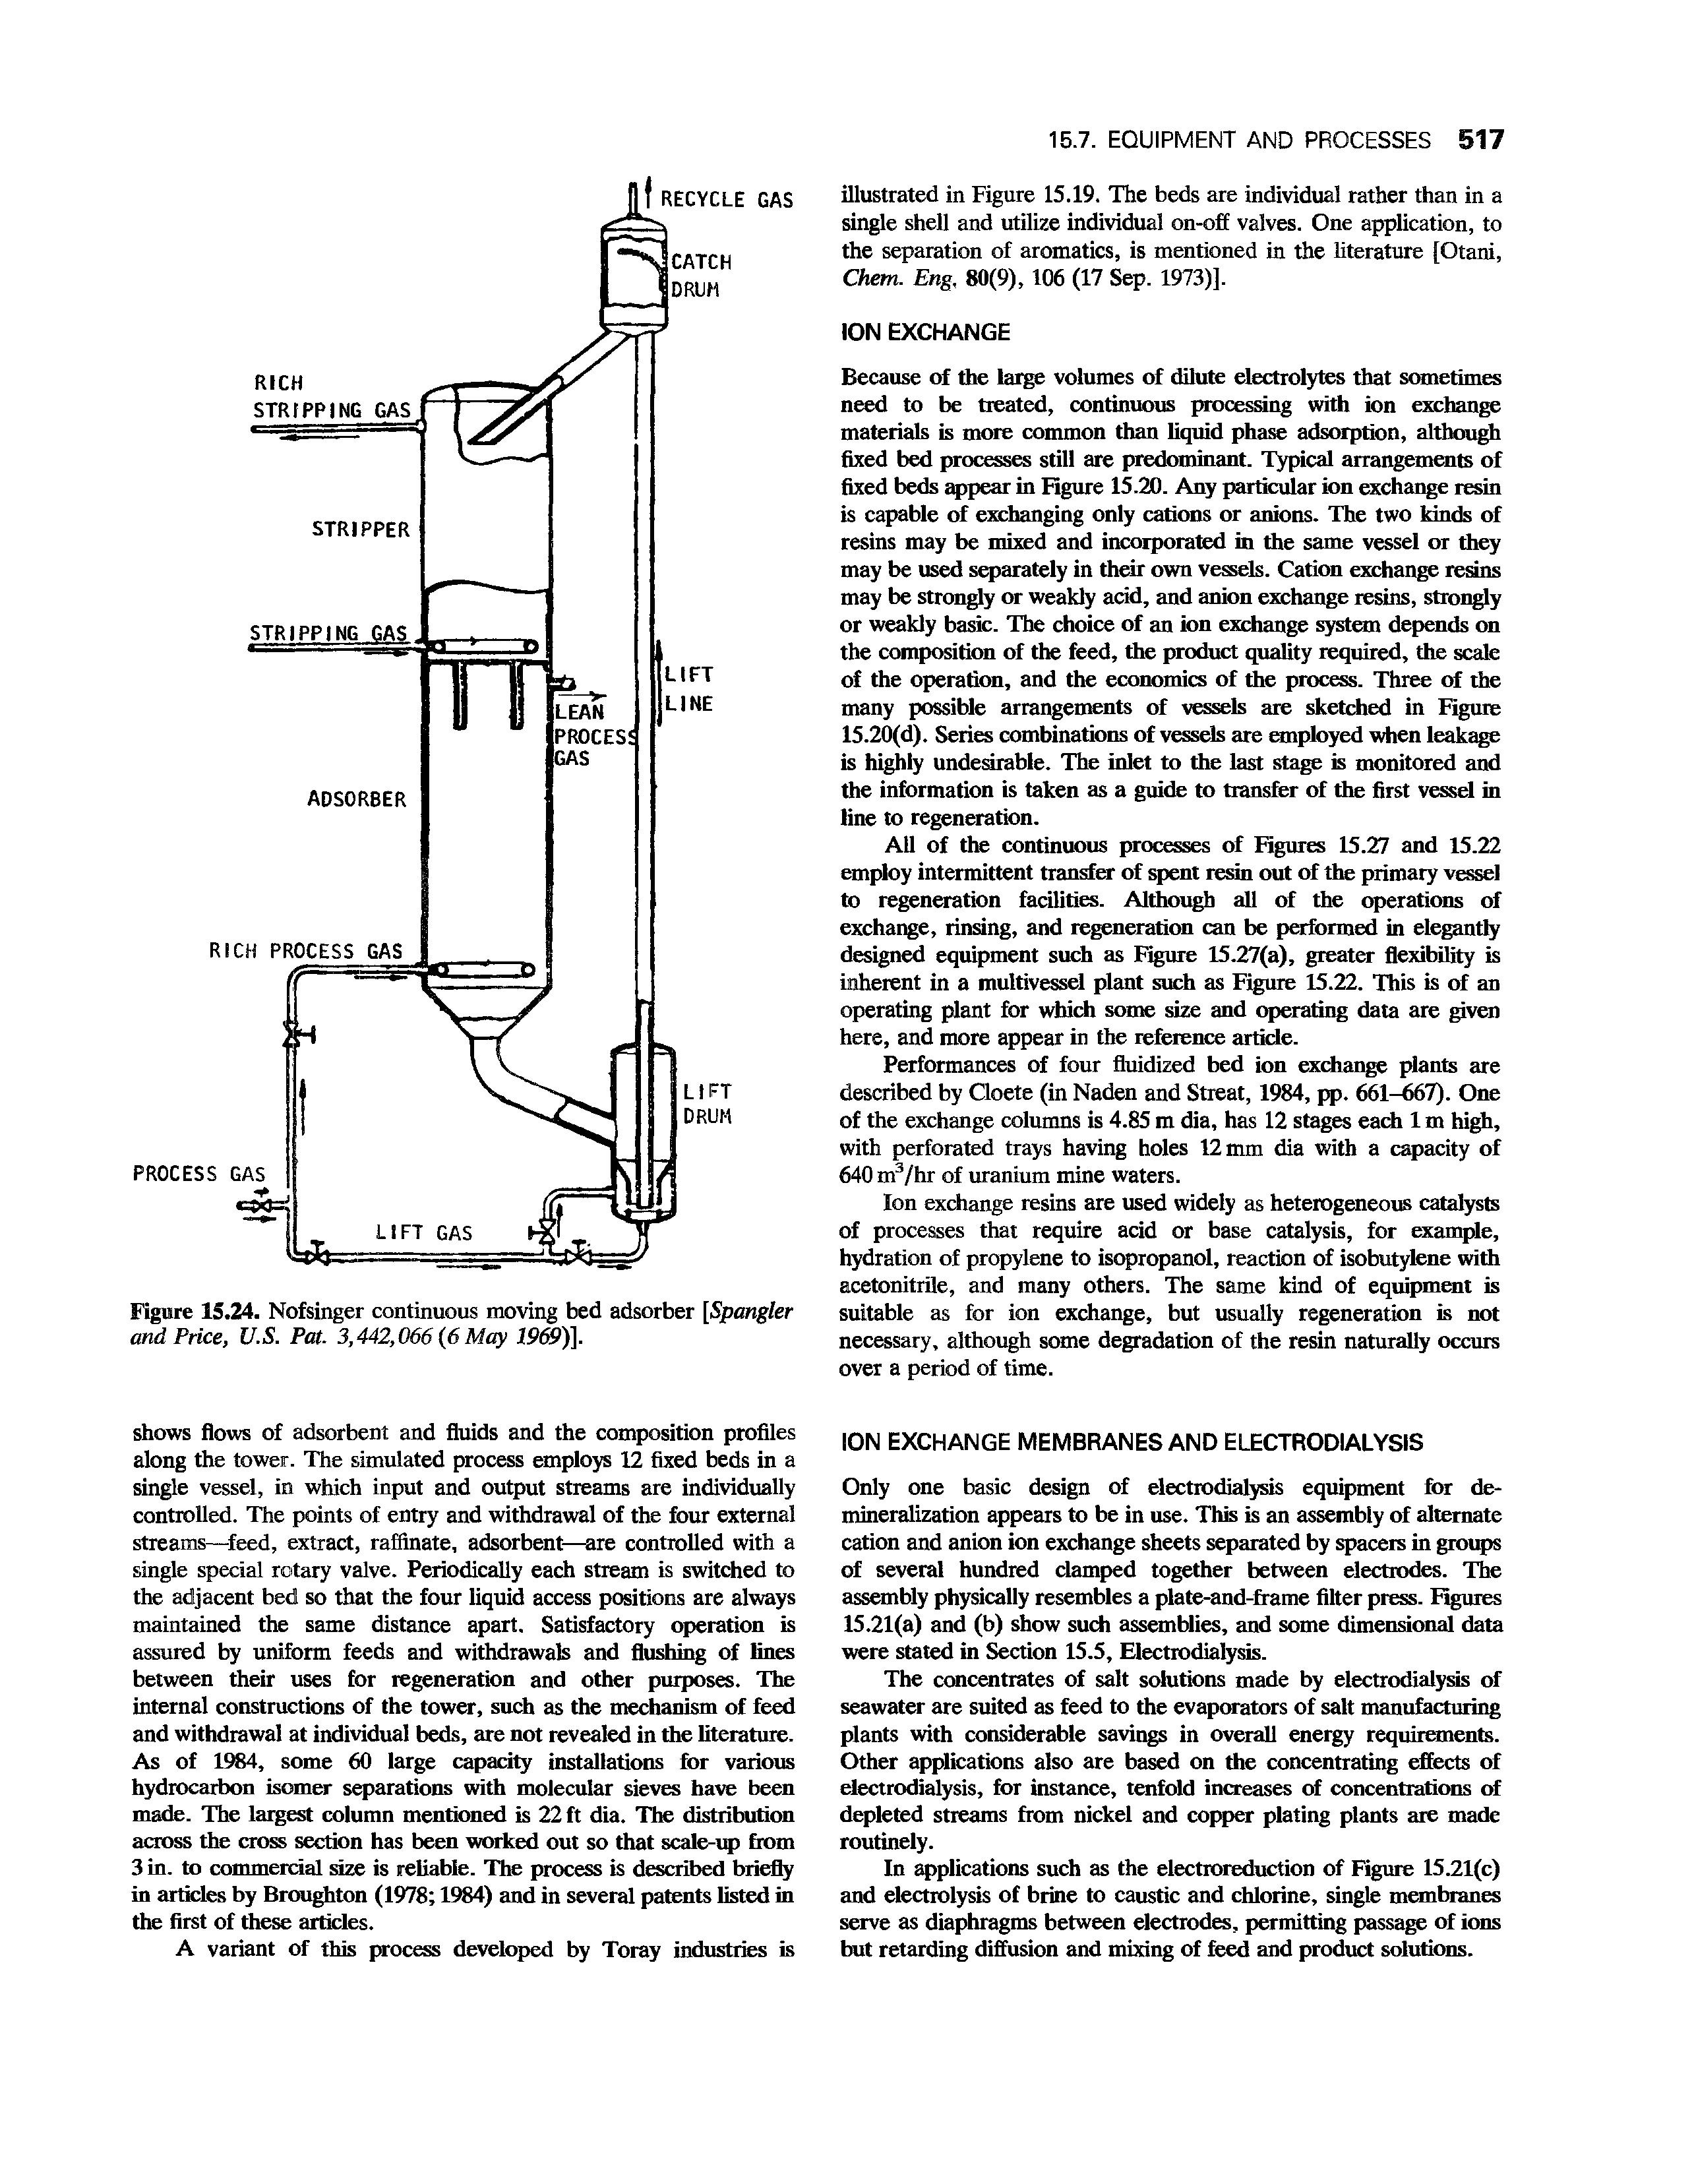 Figure 15.24. Nofsinger continuous moving bed adsorber [Spangler and Price, U.S. Pat. 3,442,066 (6 May 1969)].